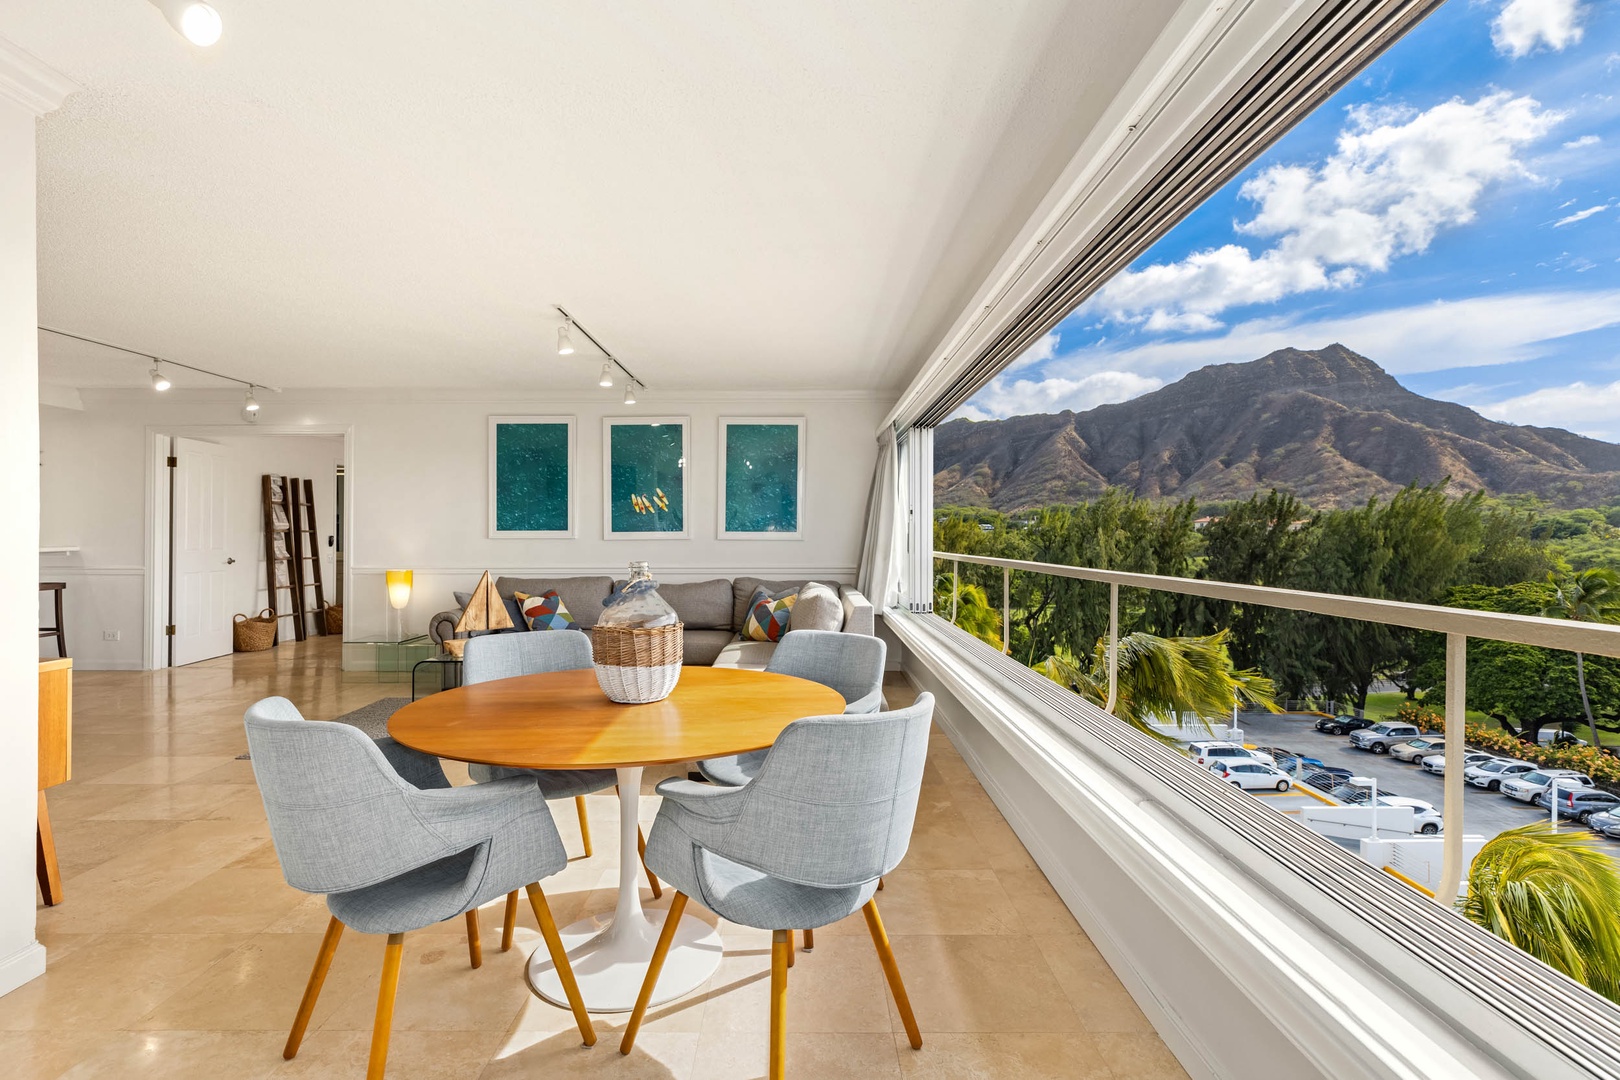 Honolulu Vacation Rentals, Colony Surf Getaway - Chic dining nook with stylish decor and expansive Diamon Head views, offering an inspiring backdrop for meals and conversations.